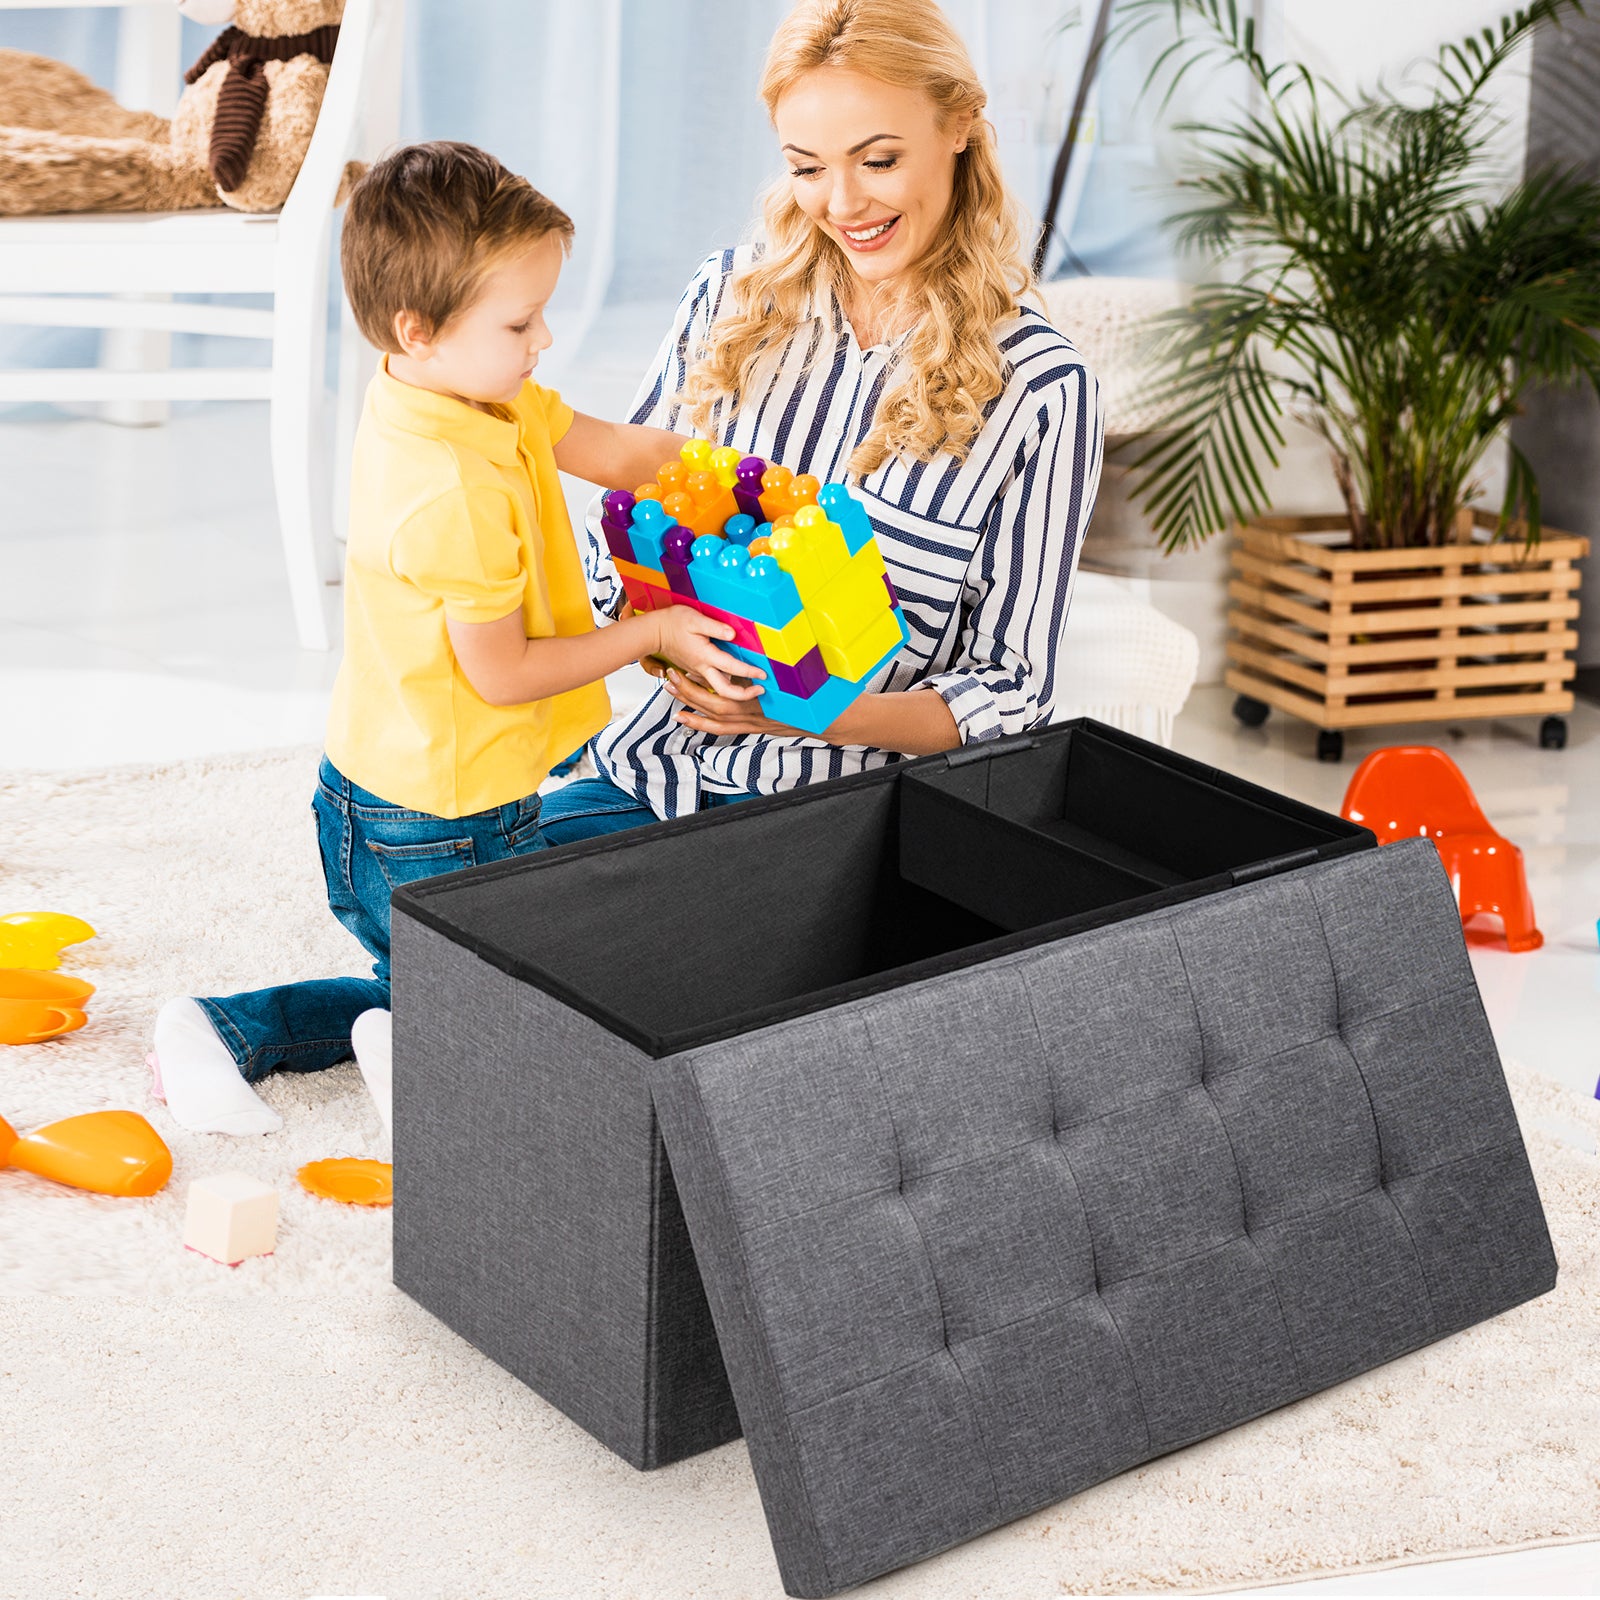 Fabric Foldable Storage Ottoman with Padded Seat for Living Room, Portable Picnic Seat, Dark Grey, Costway, 1